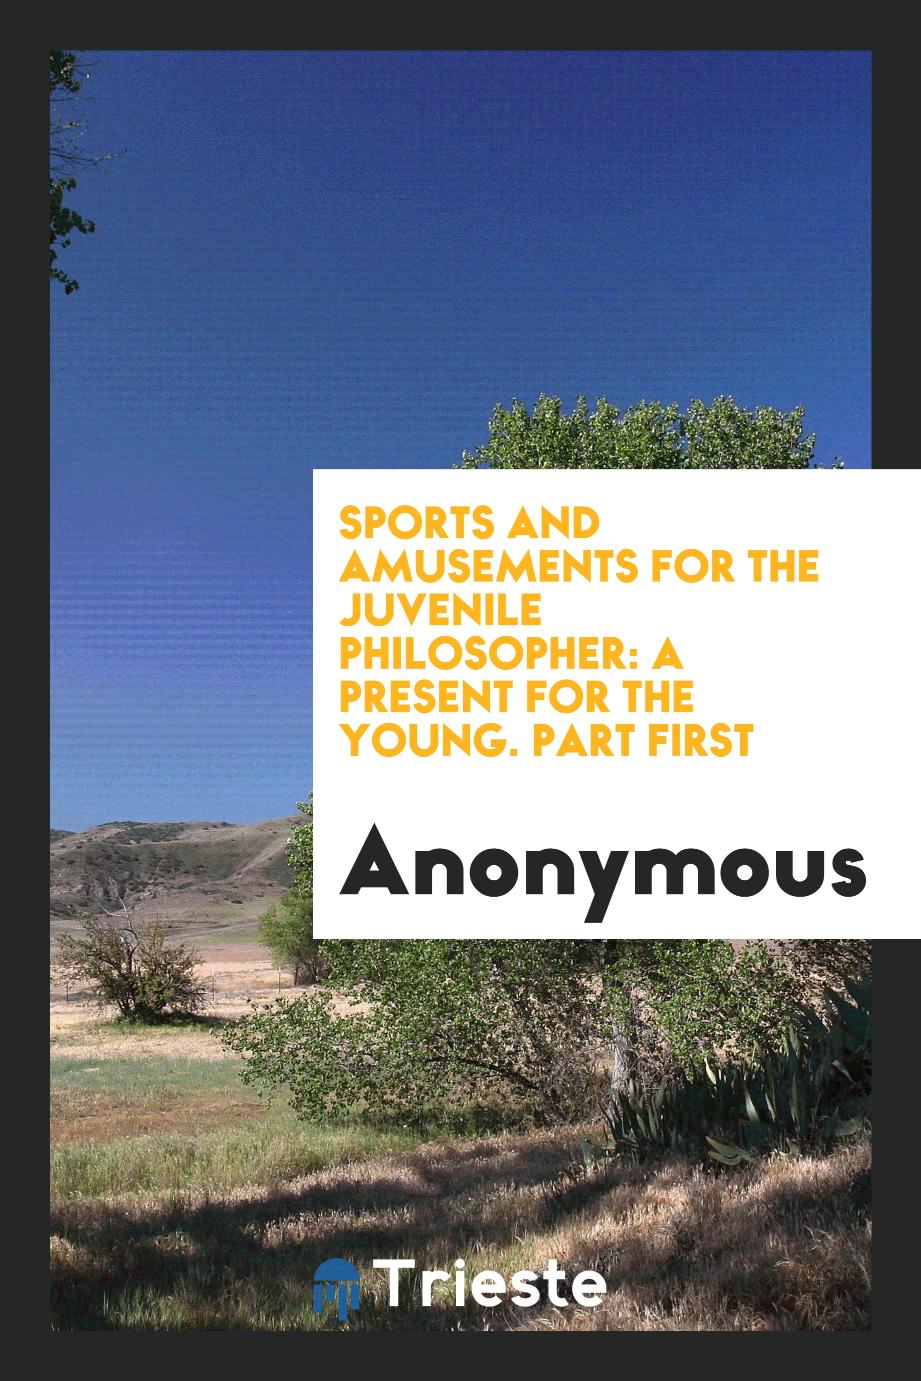 Sports and Amusements for the Juvenile Philosopher: A Present for the Young. Part First